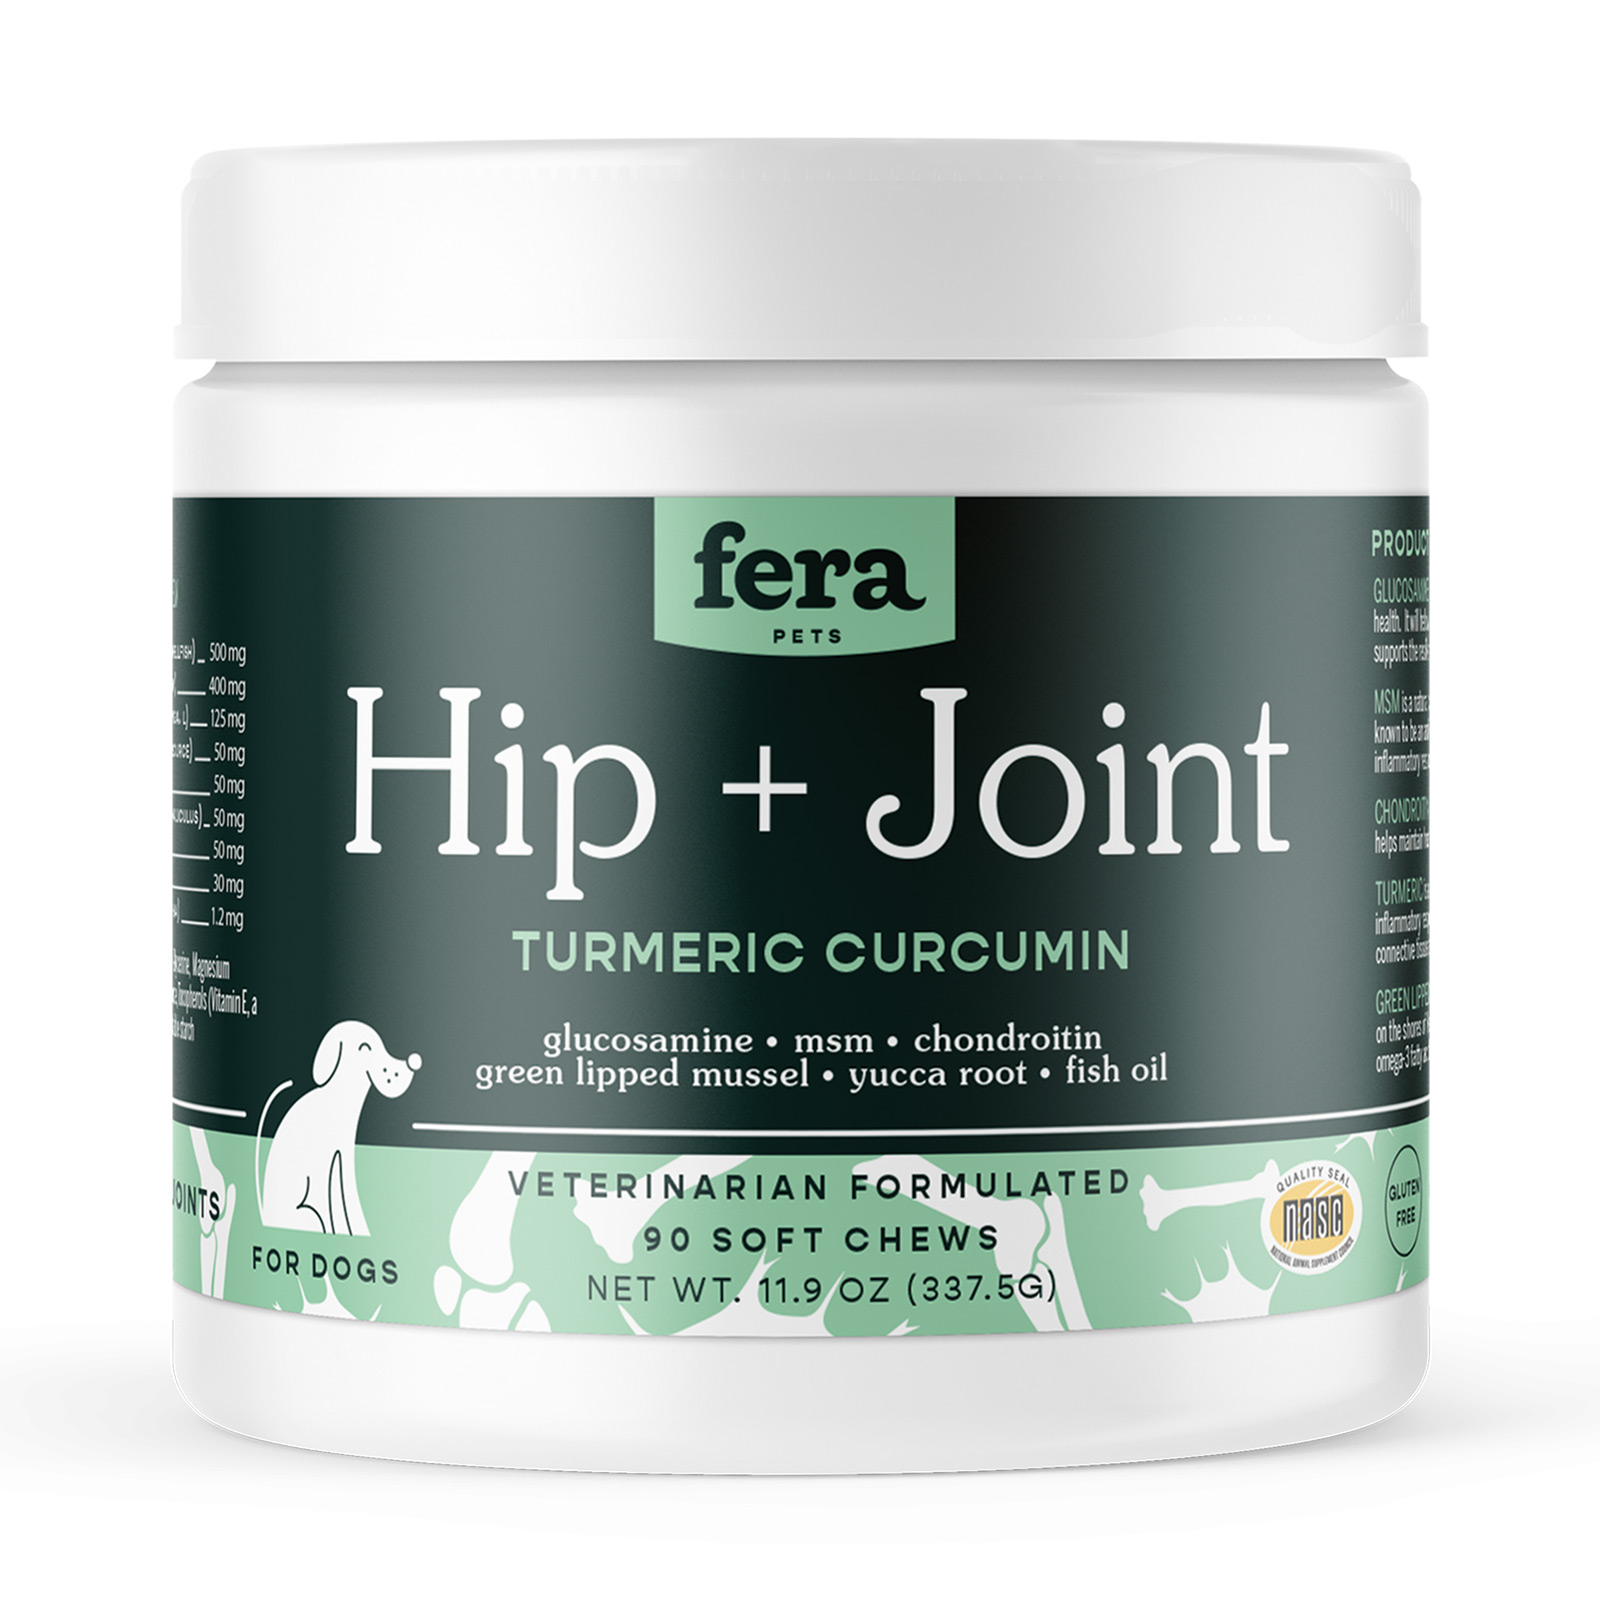 Fera Pet Organics Hip + Joint Veterinarian Formulated Soft Chews Supplements for Dogs